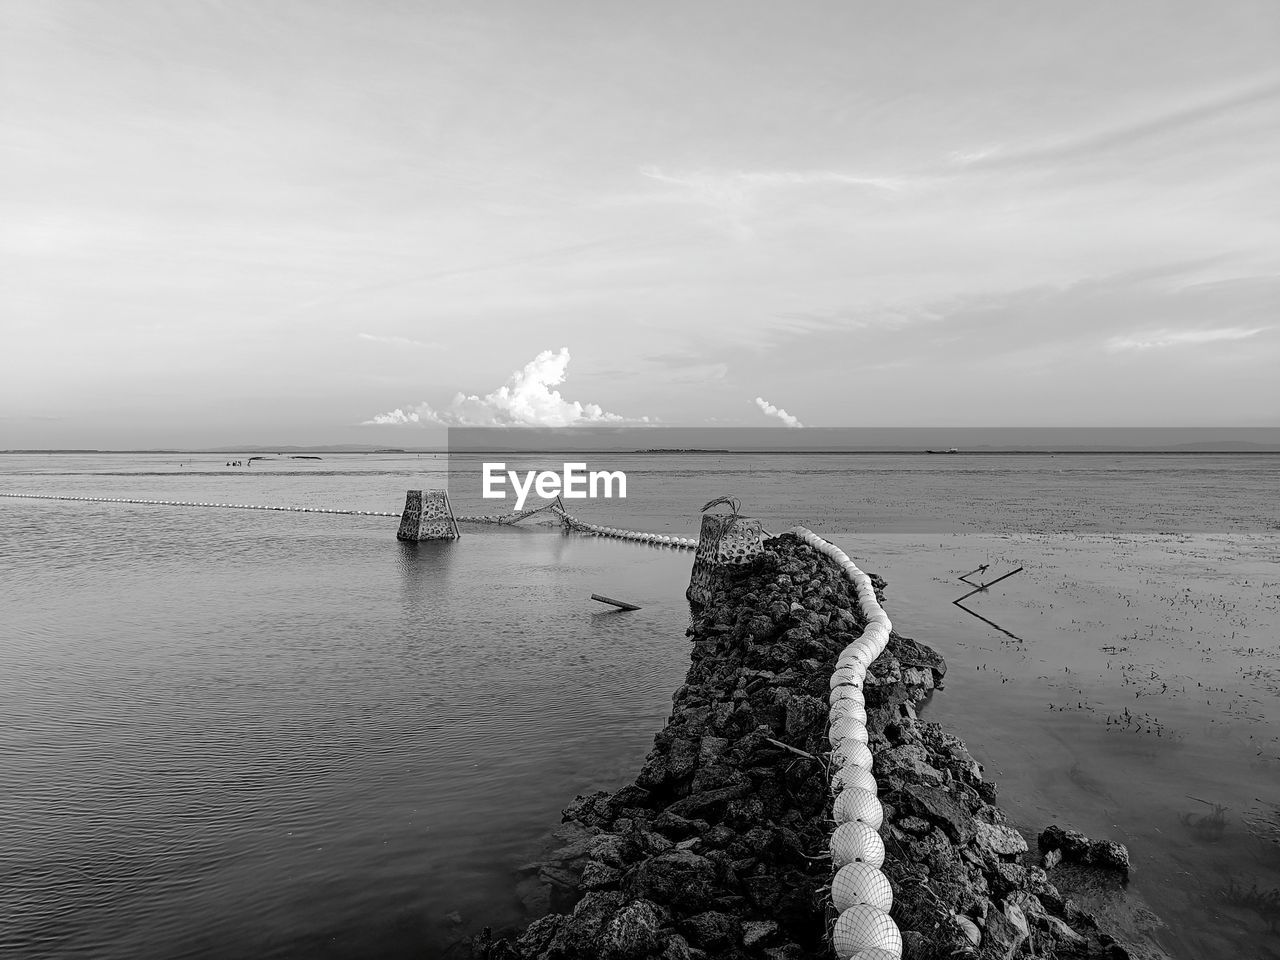 water, sea, sky, black and white, scenics - nature, horizon, nature, land, beauty in nature, cloud, monochrome photography, ocean, beach, coast, monochrome, horizon over water, shore, white, tranquility, wave, rock, tranquil scene, environment, no people, travel destinations, reflection, outdoors, nautical vessel, tower, day, travel, non-urban scene, landscape, idyllic, black, seascape